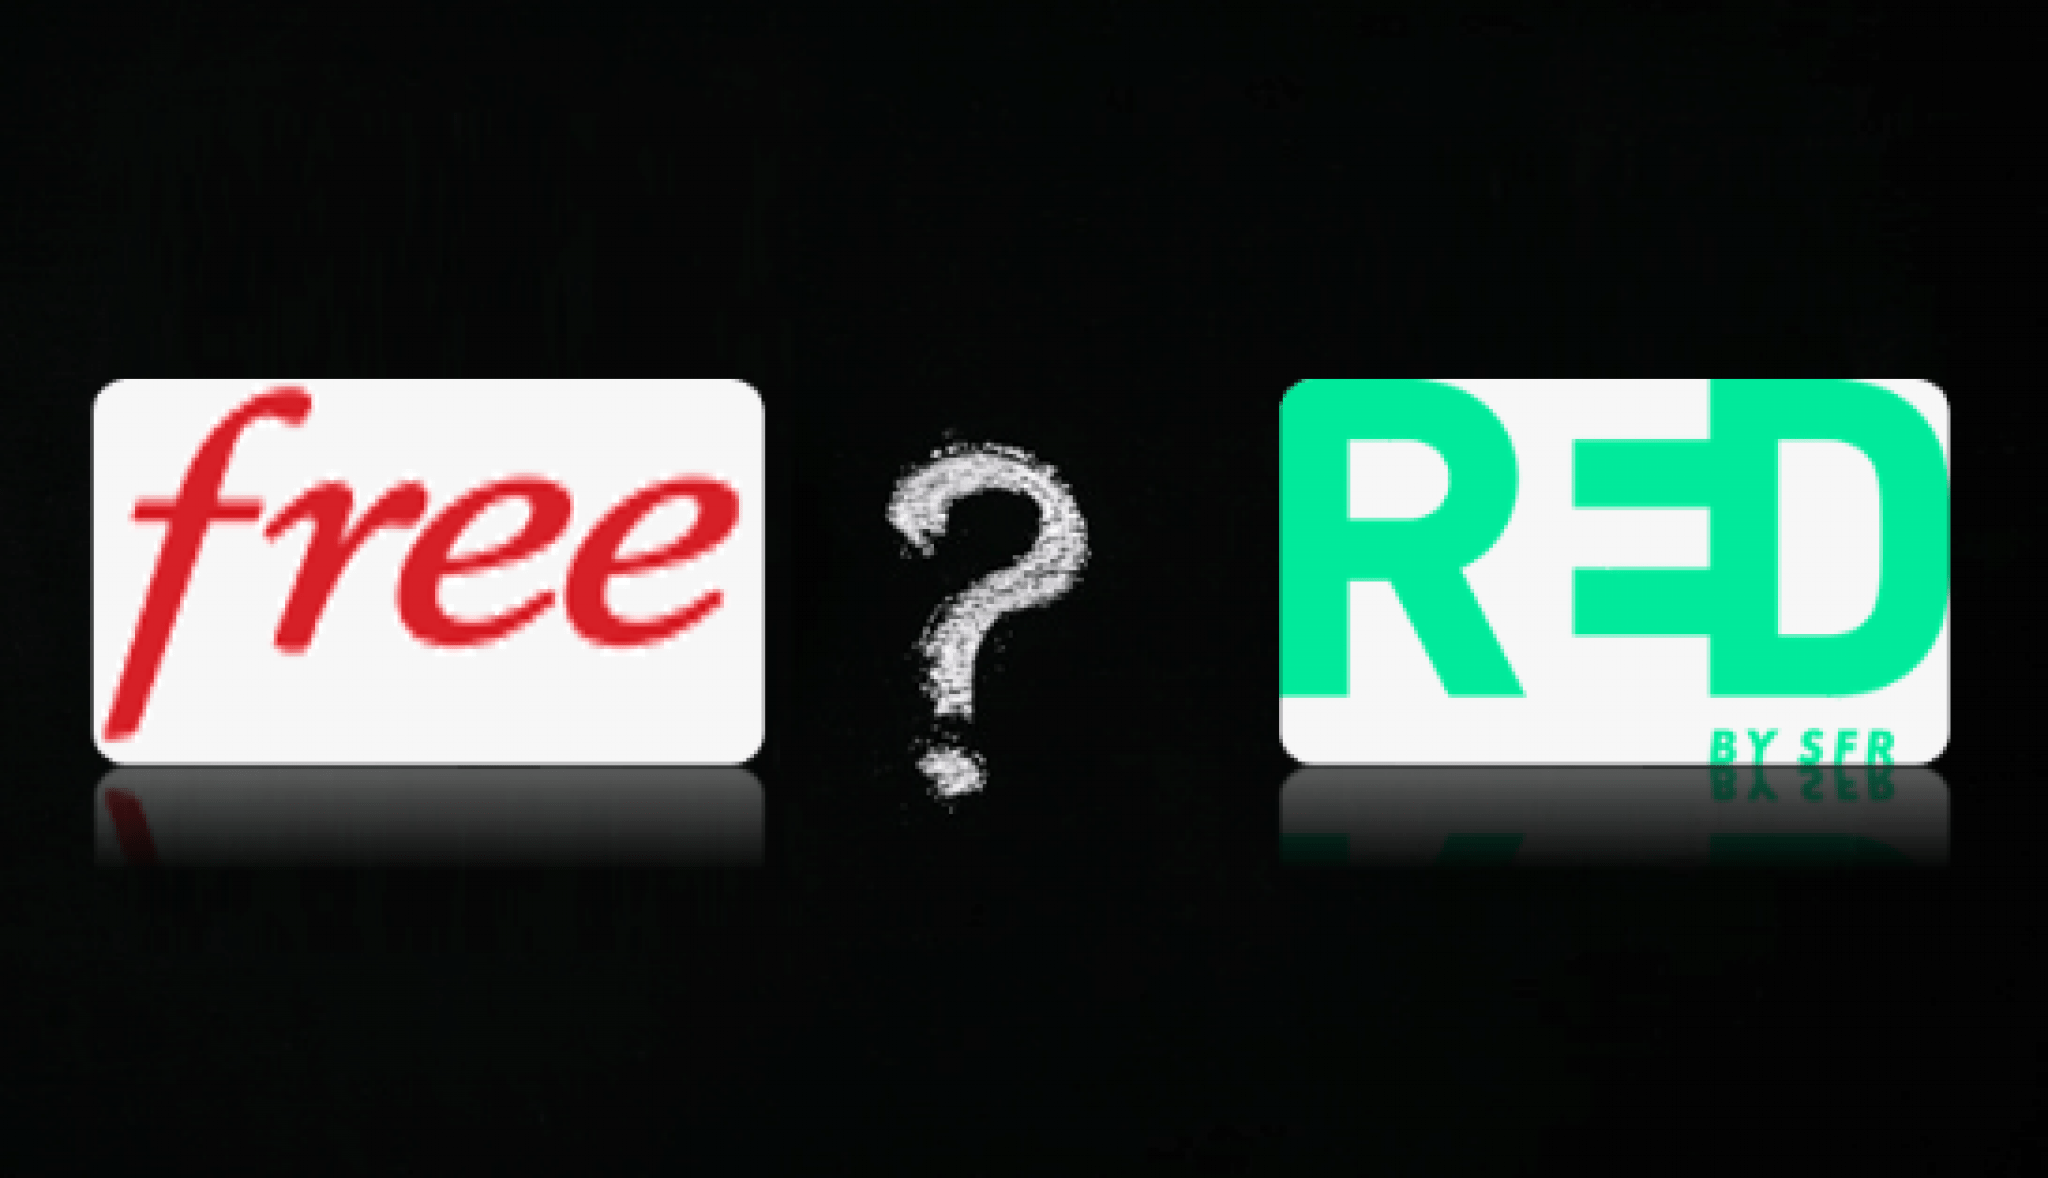 RED by SFR et Free se retrouvent en forte concurrence